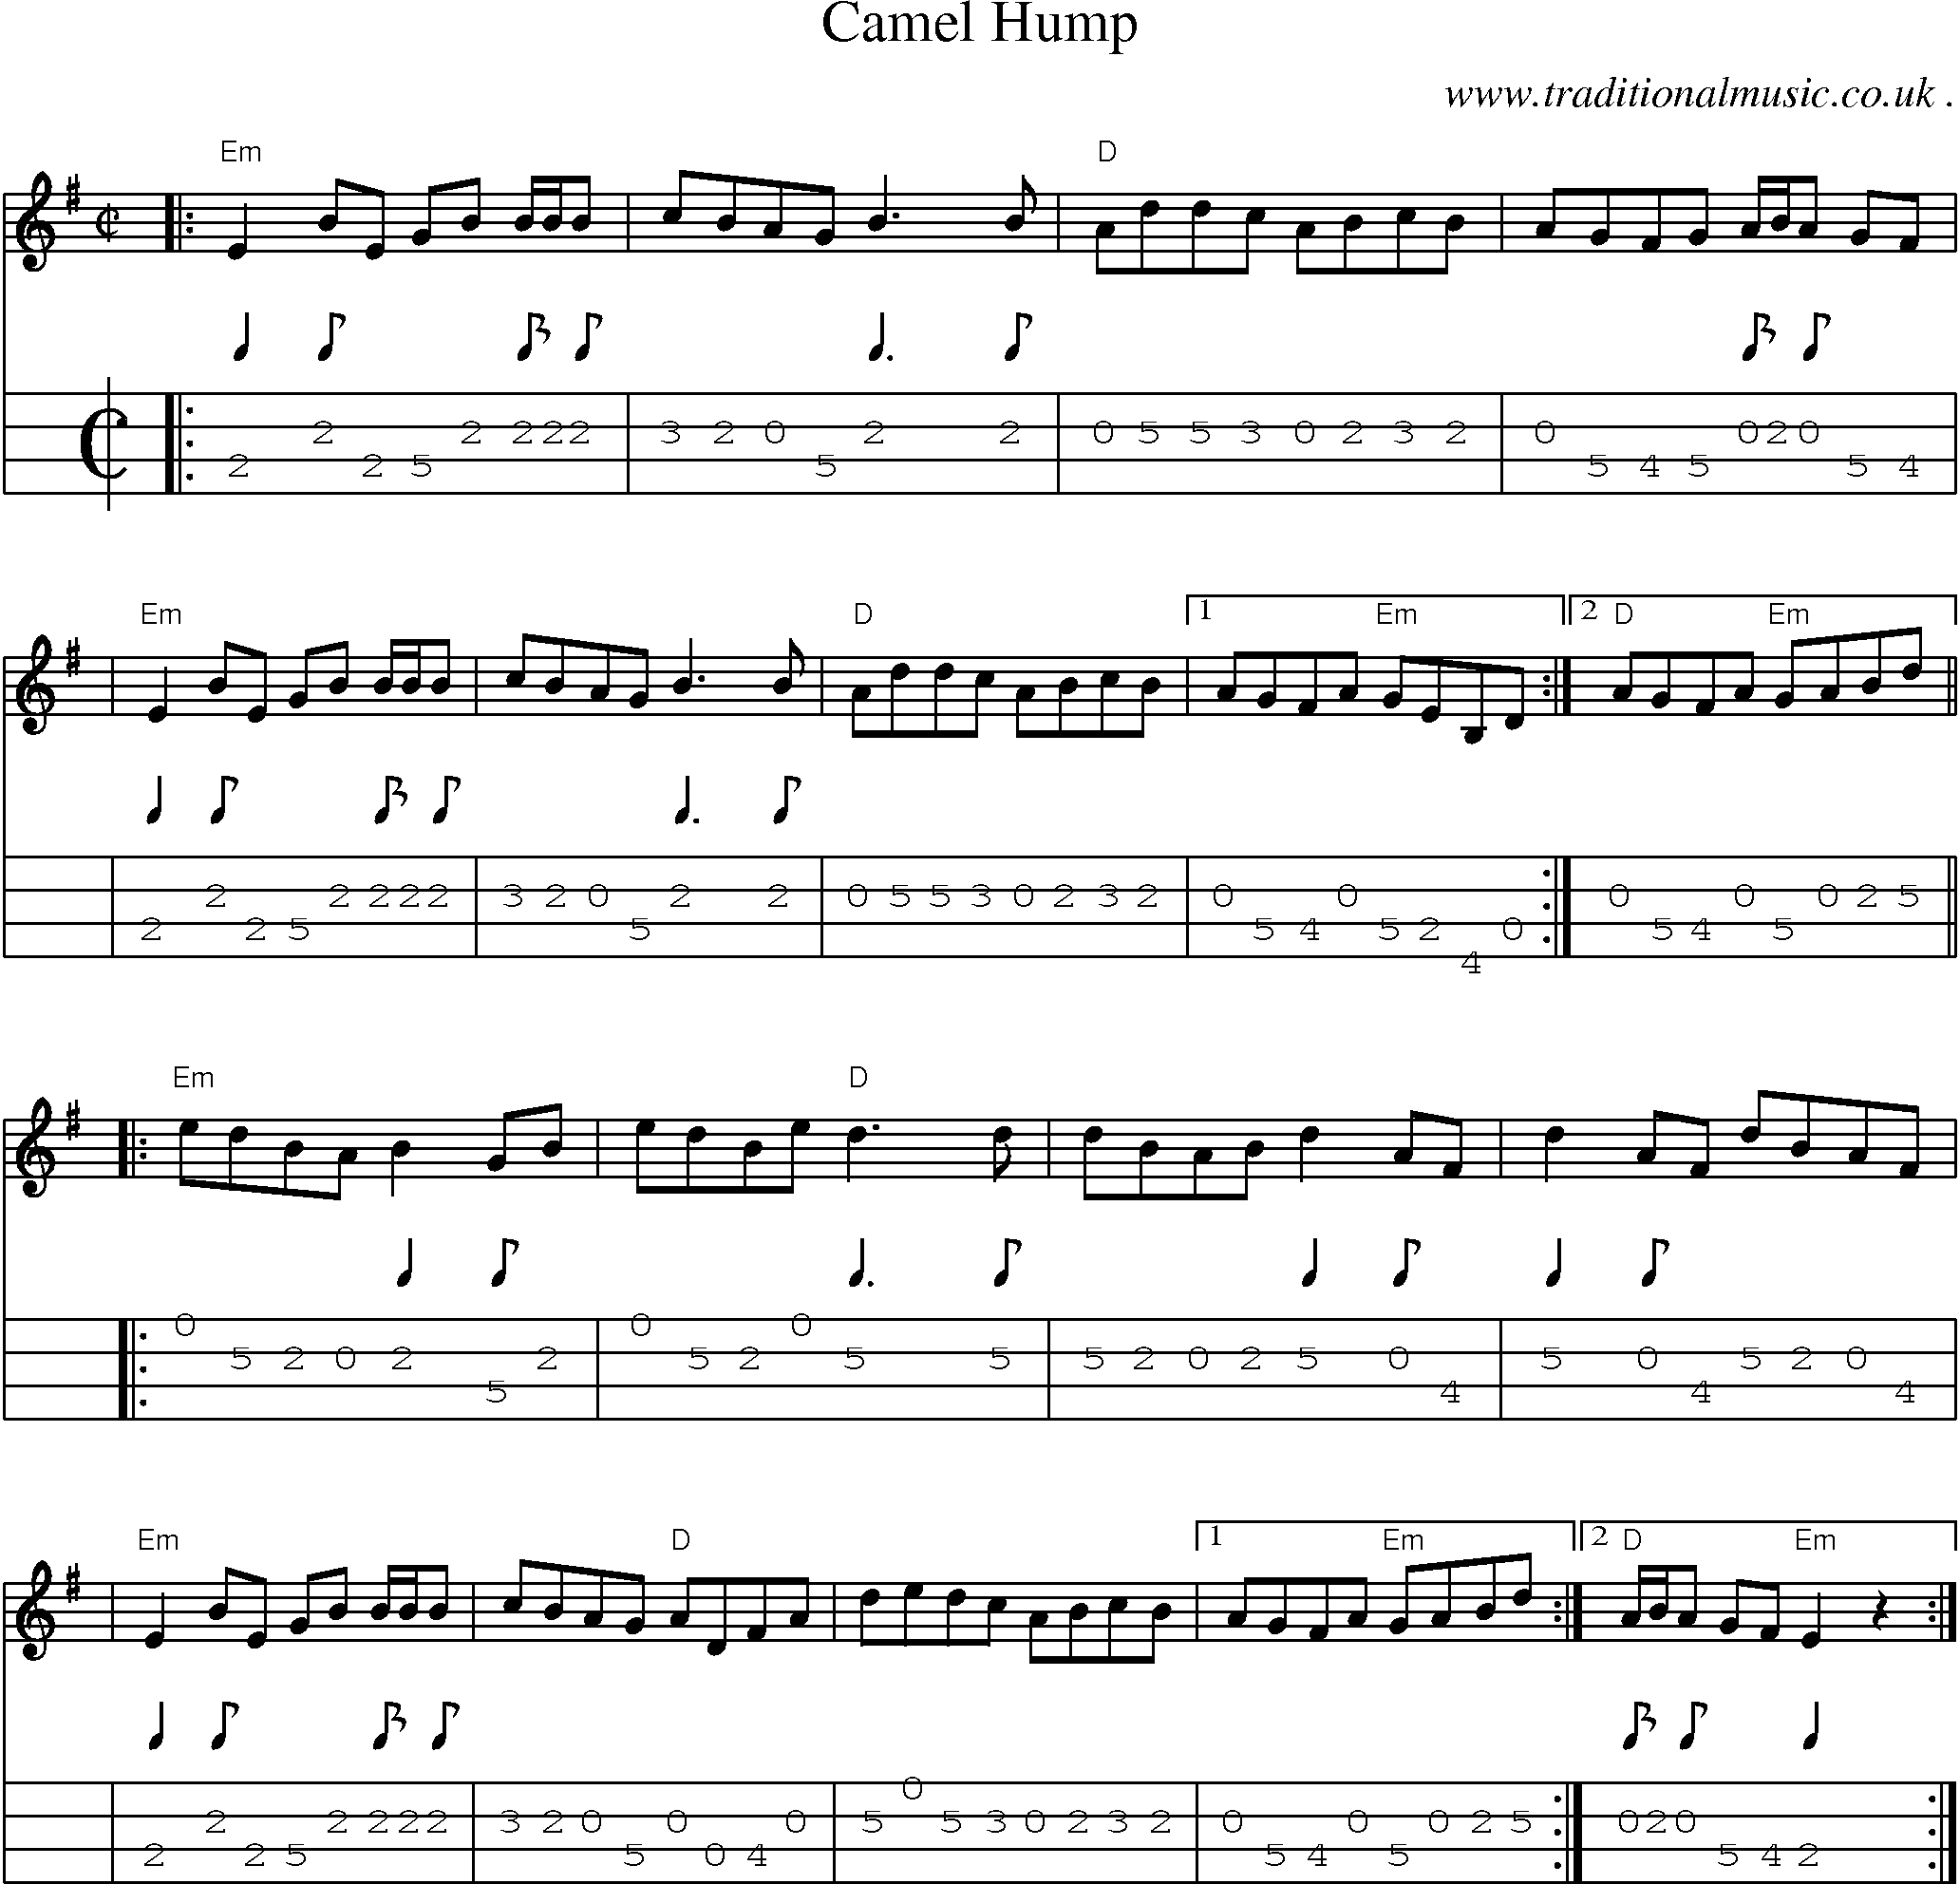 Sheet-music  score, Chords and Mandolin Tabs for Camel Hump